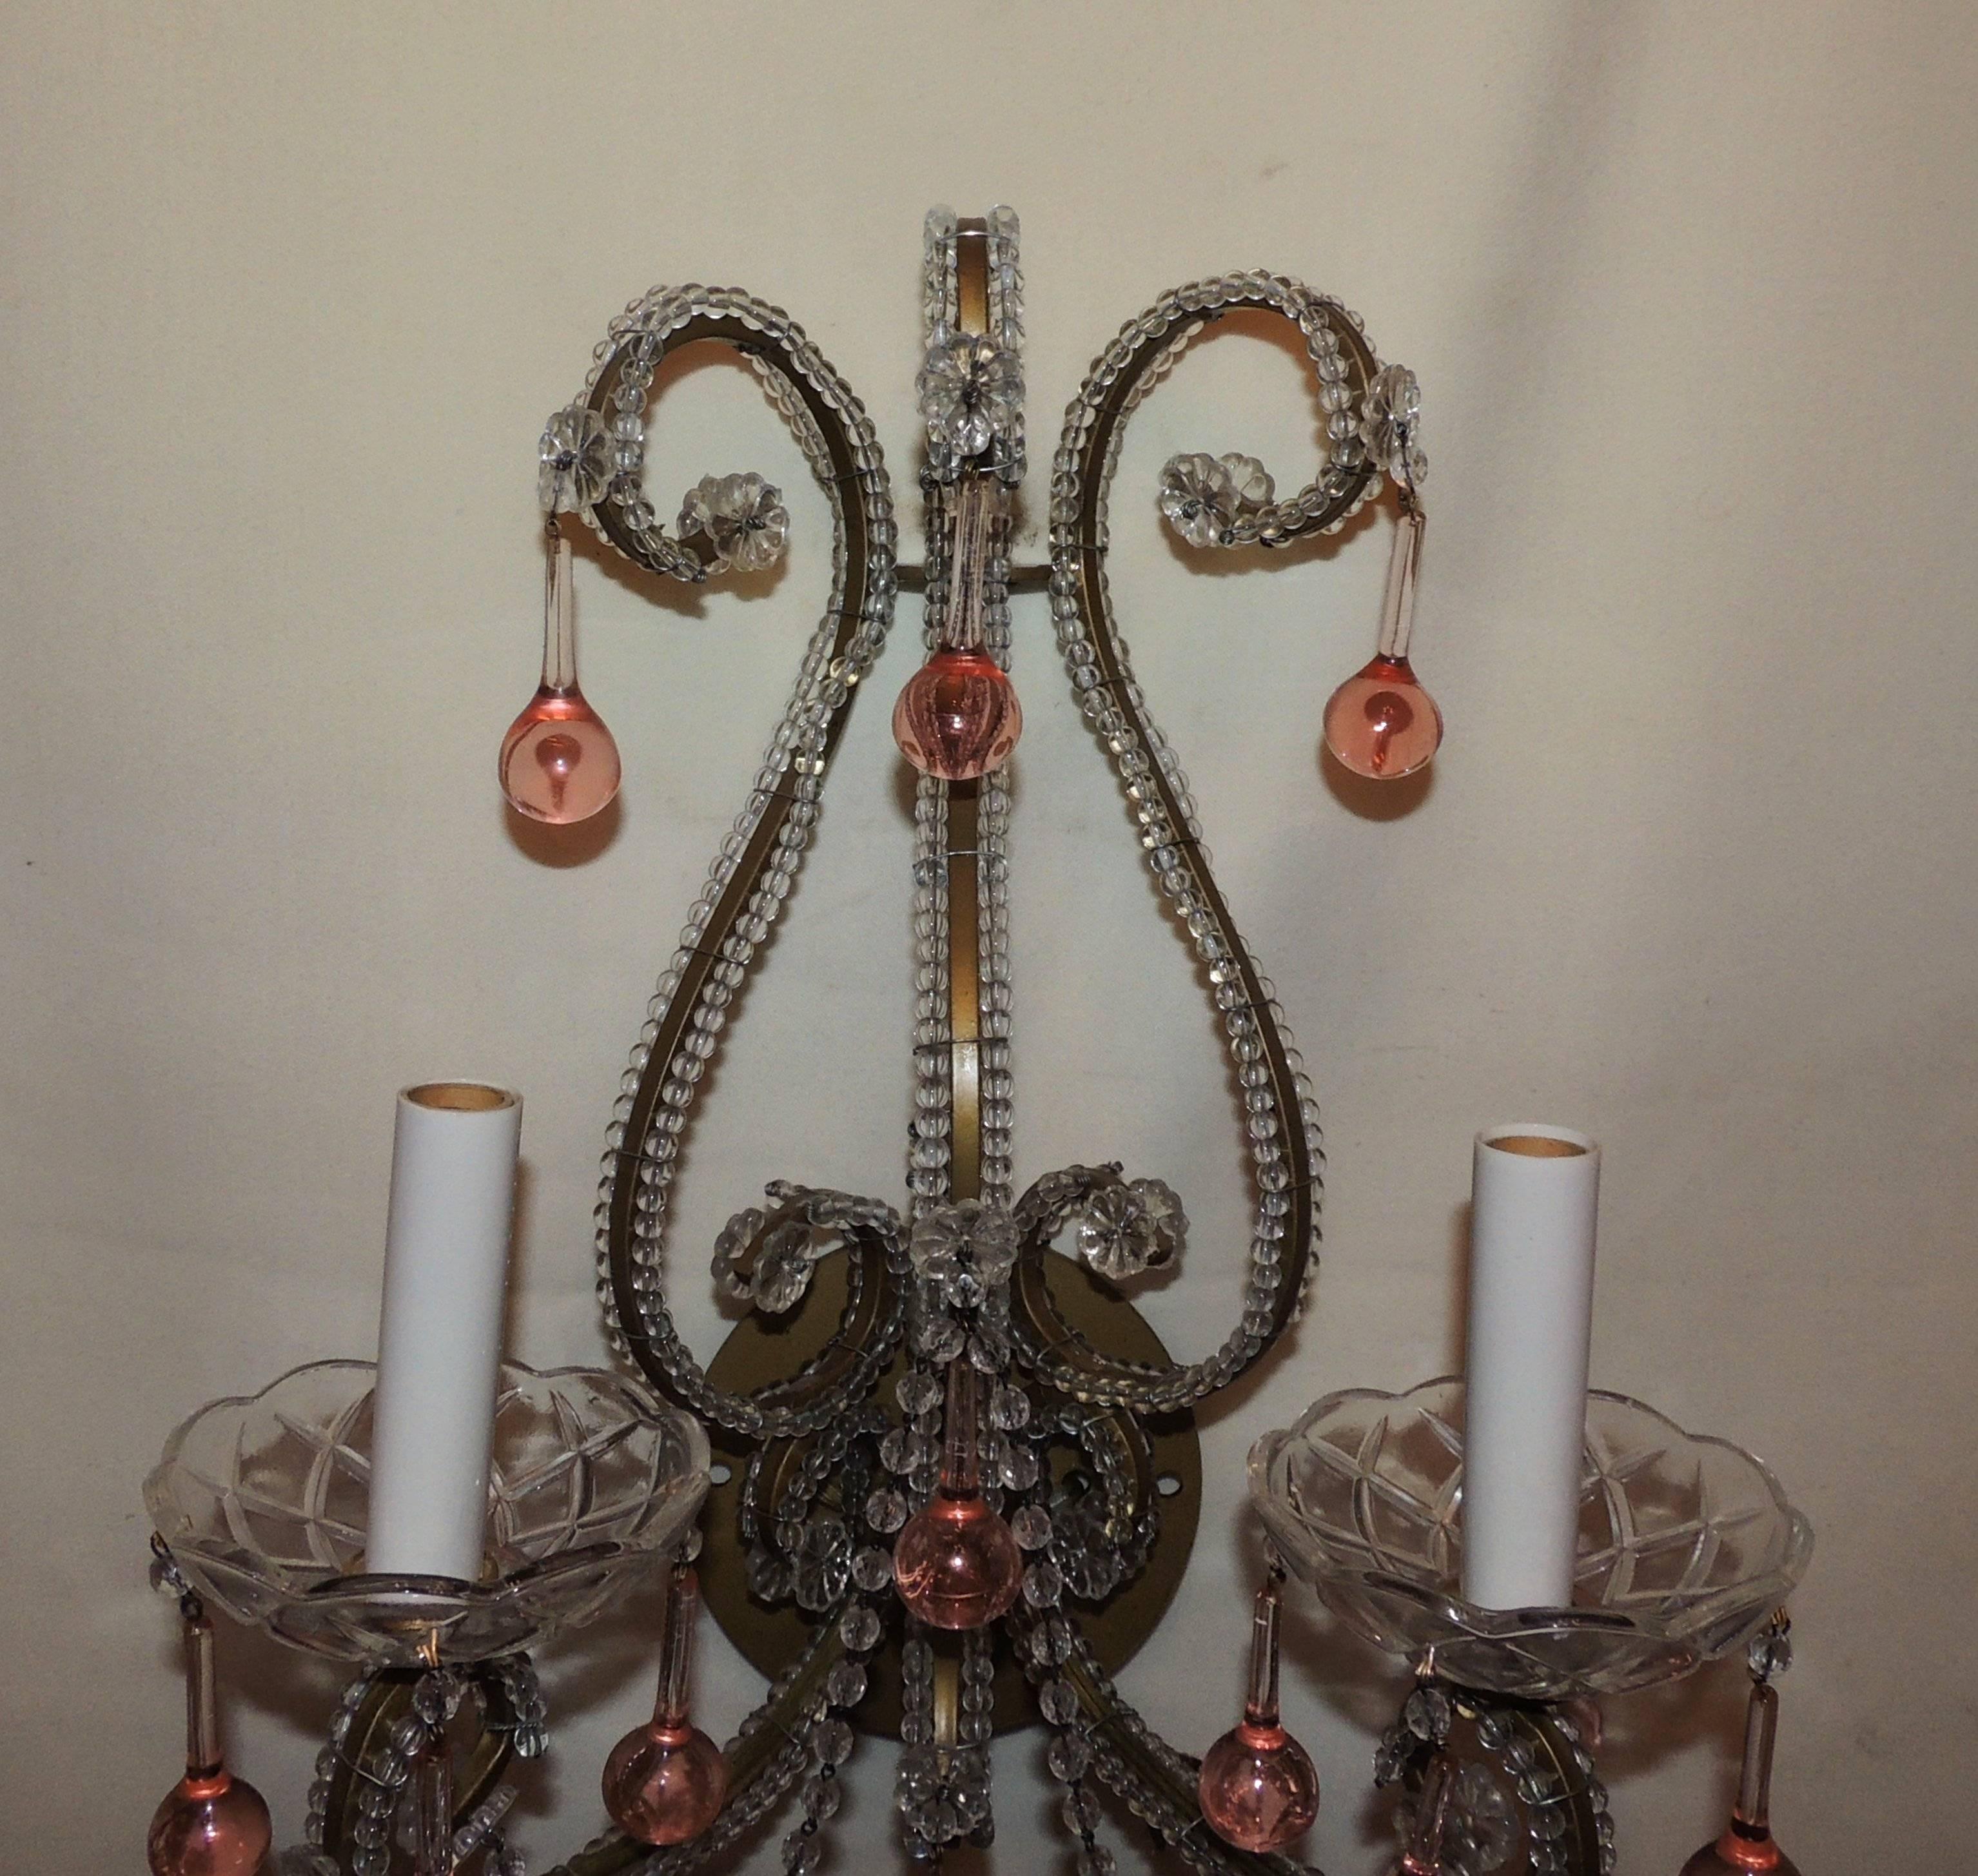 Wonderful pair of fine beaded Italian two light crystal sconces with peach colored crystal drops. Minor wear to gilding, some of the beads and crystals have been reattached but still retain the look of old. Completely rewired and ready to install in